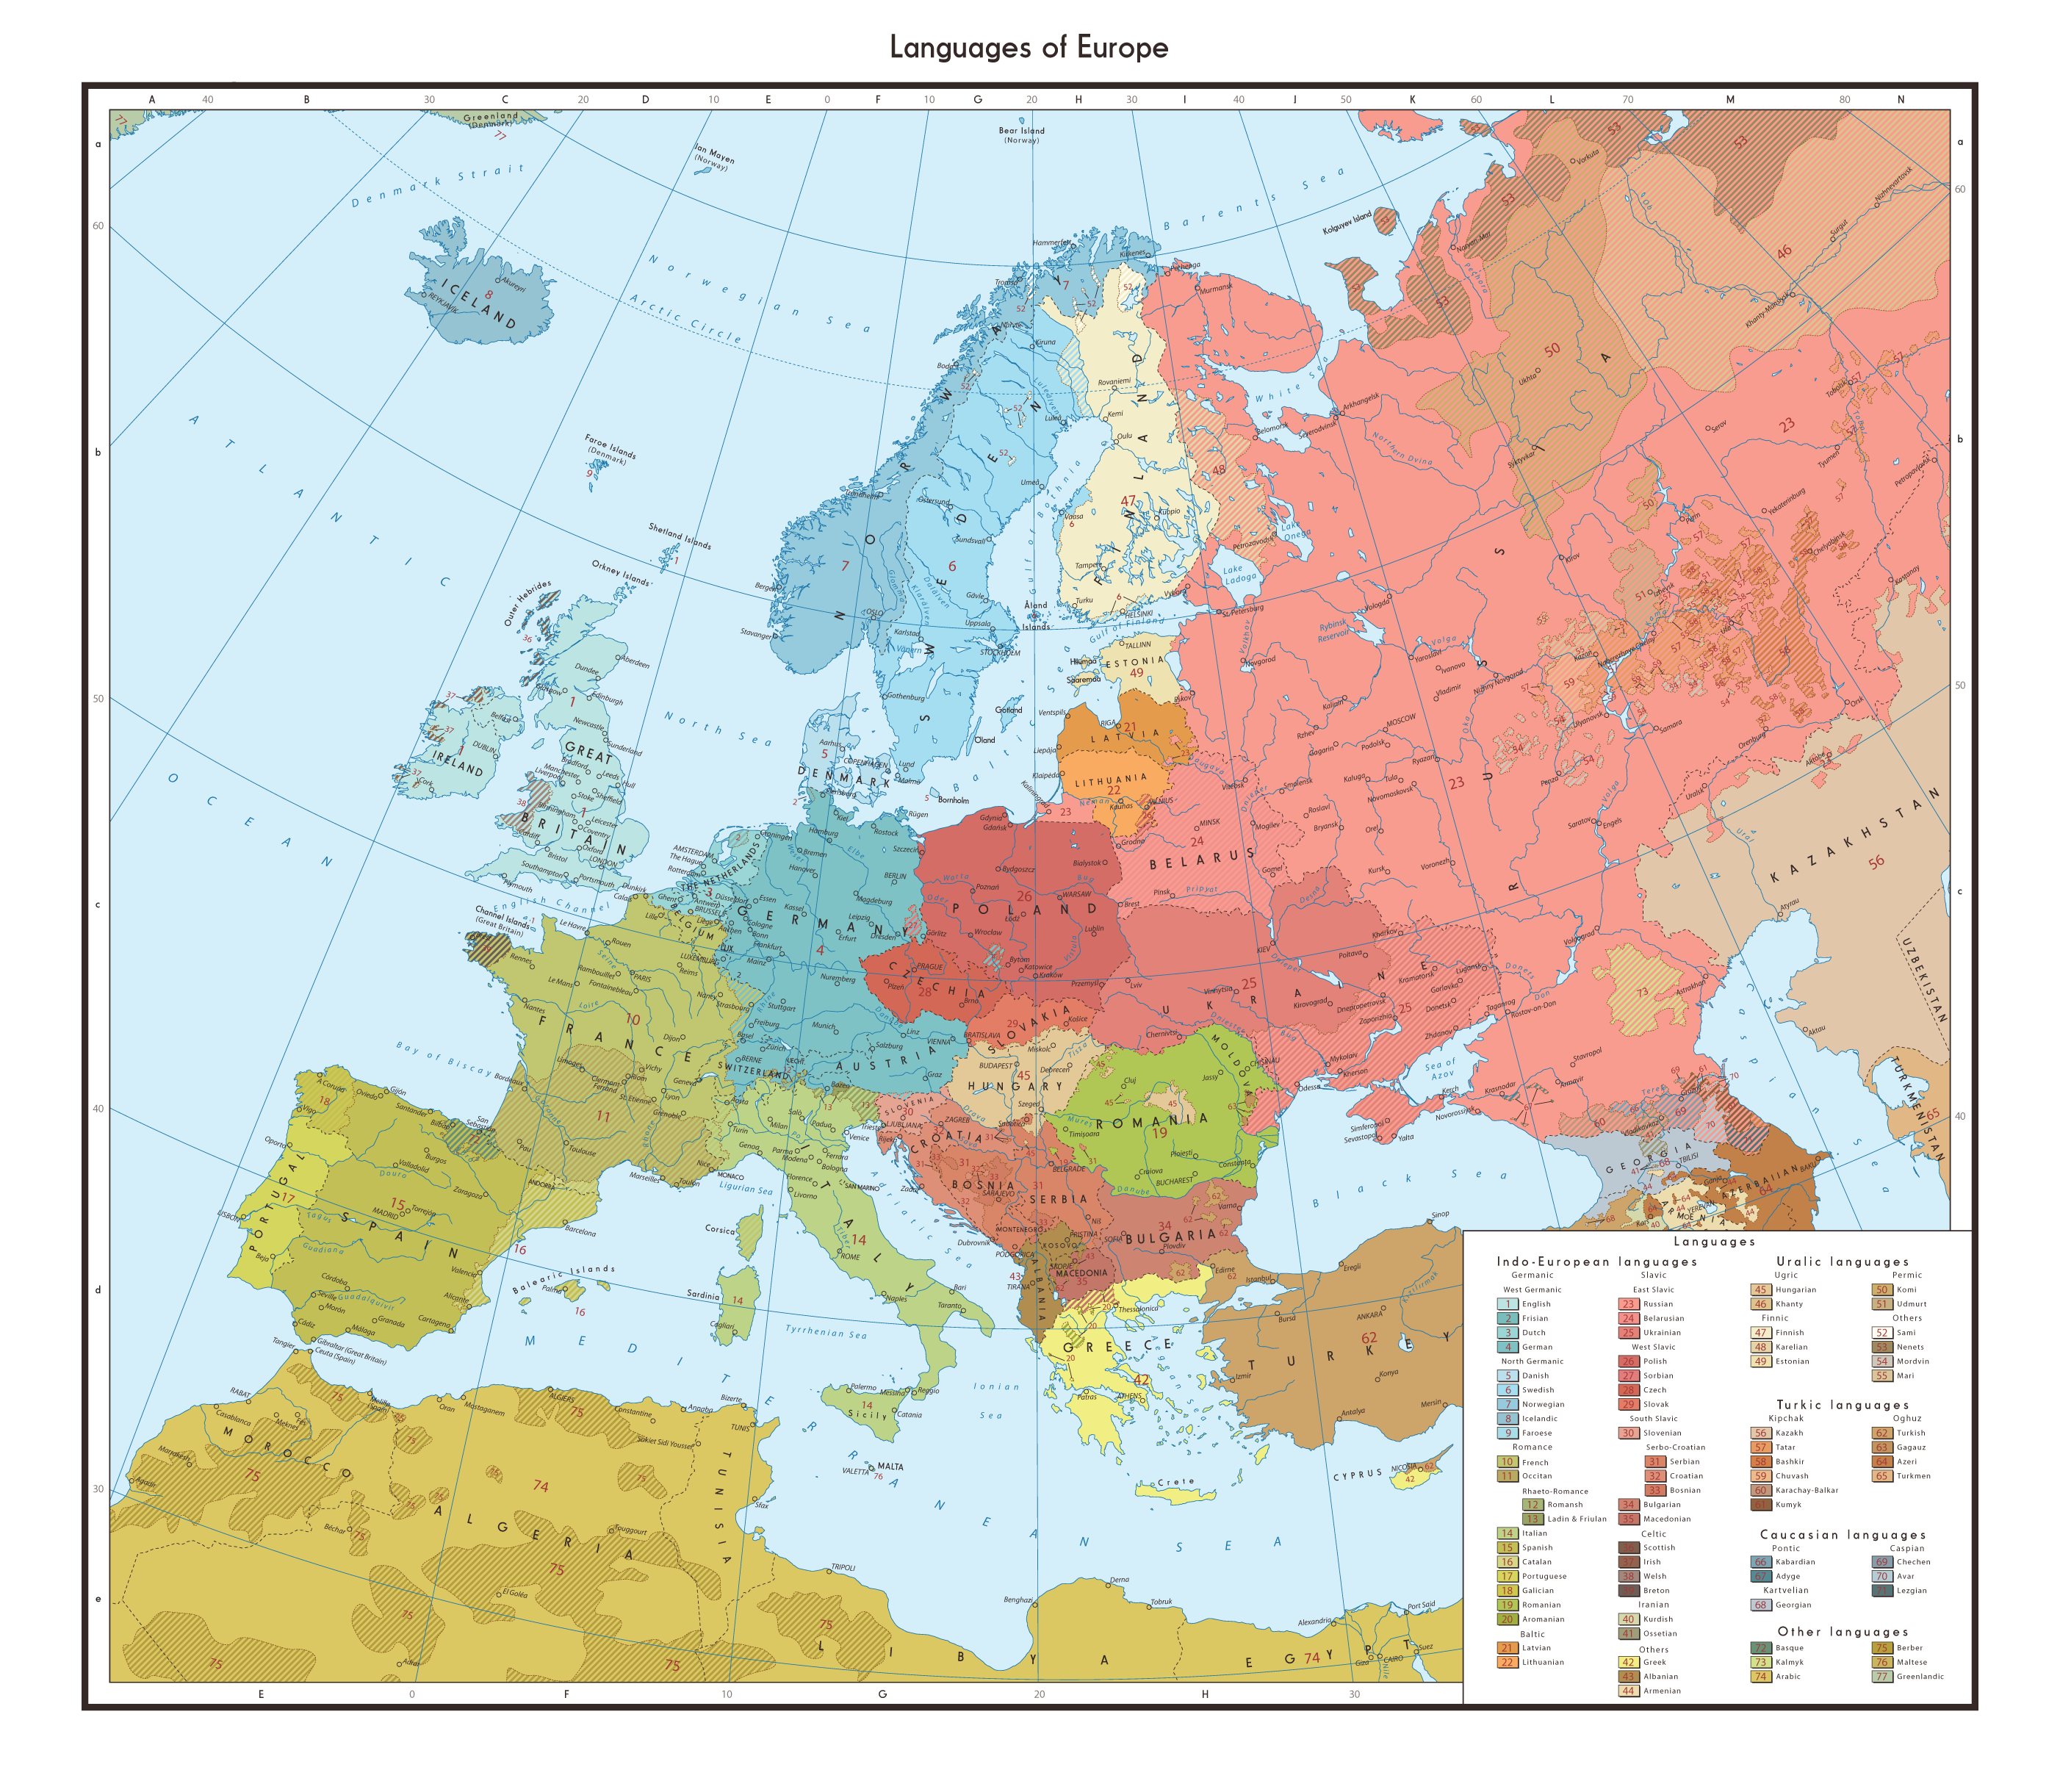 Linguistic map of Europe